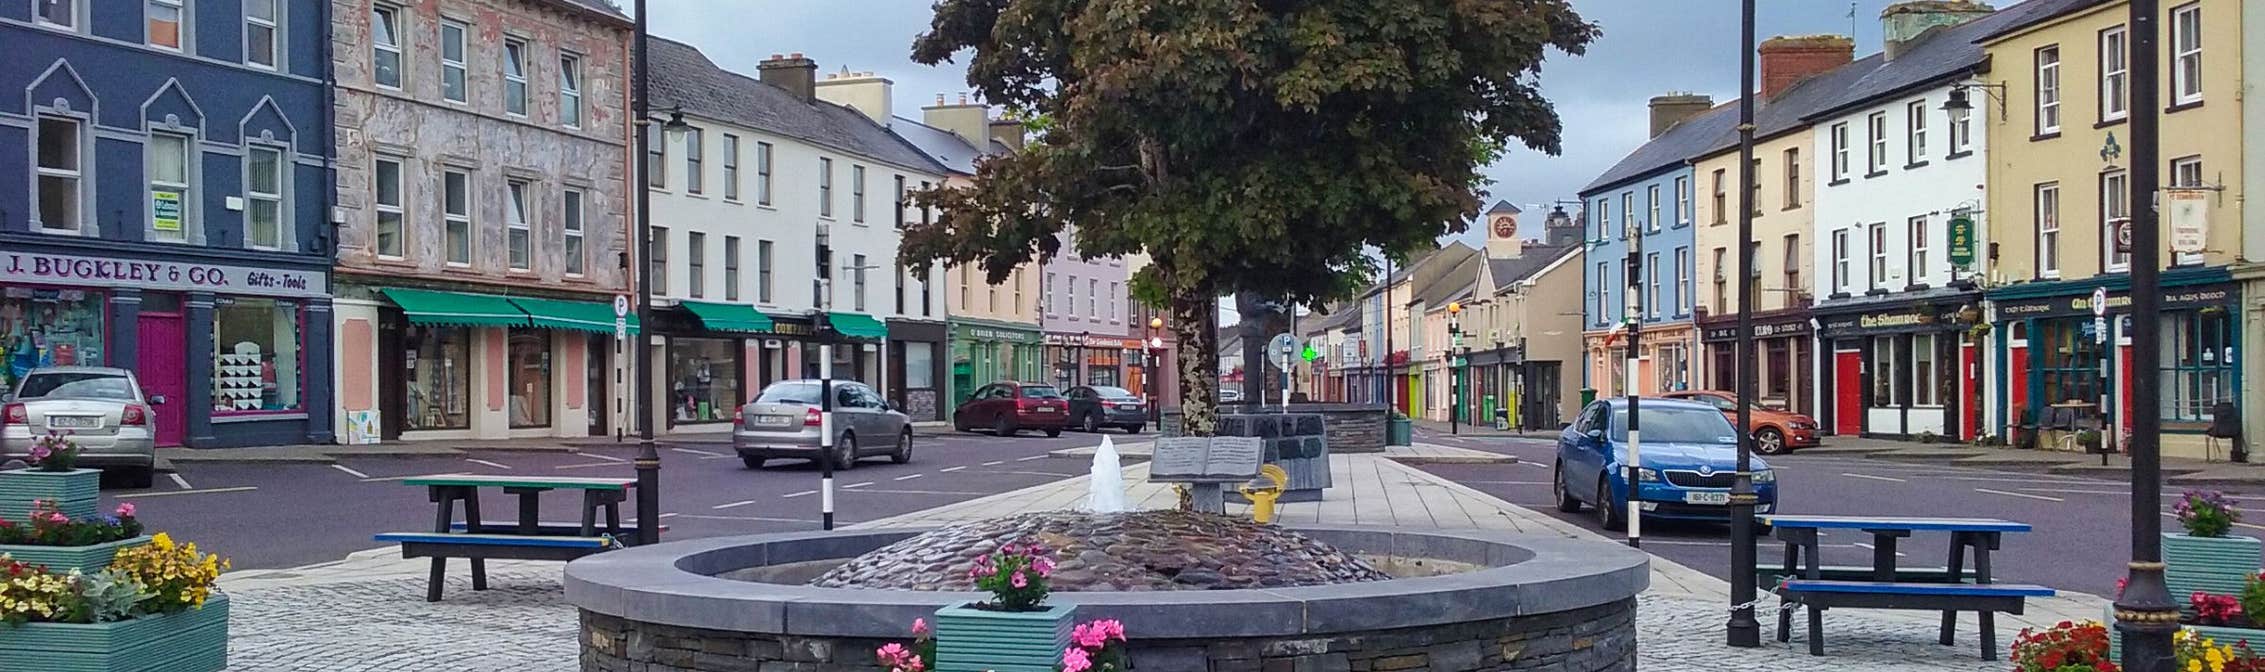 Image of Dunmanway town in County Cork